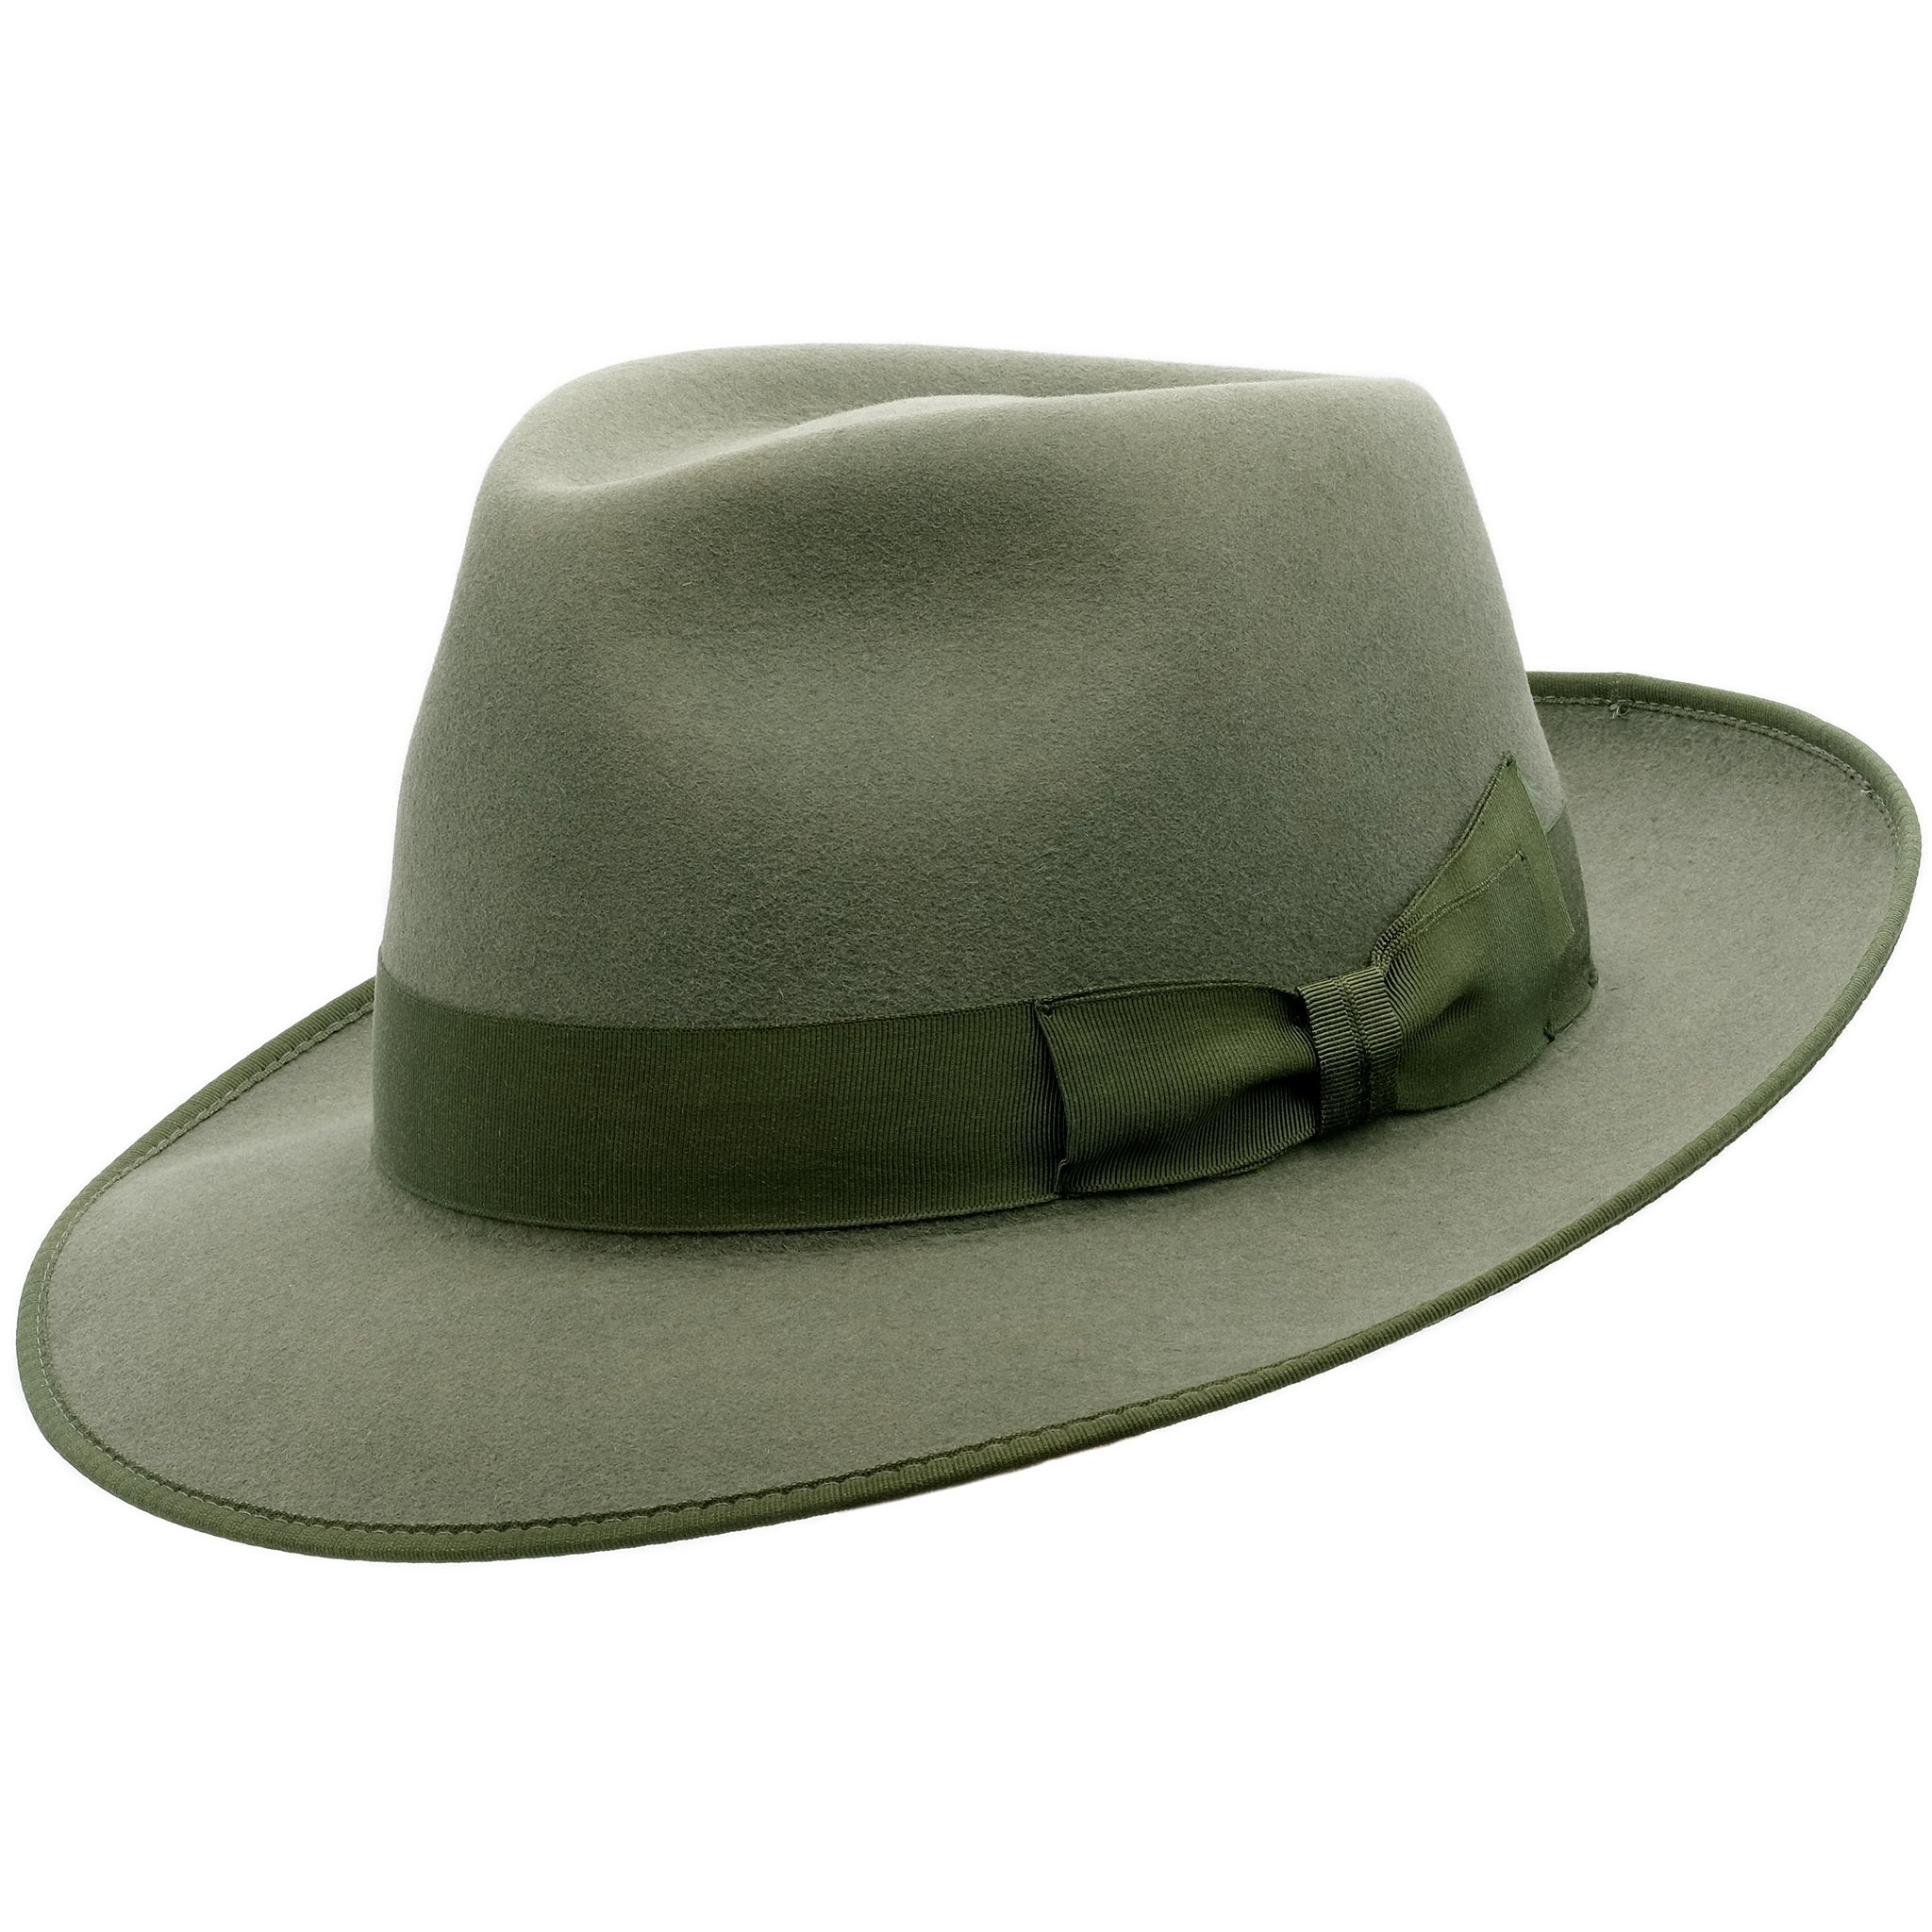 Angle view of Akubra Stylemaster hat in Bluegrass Green colour